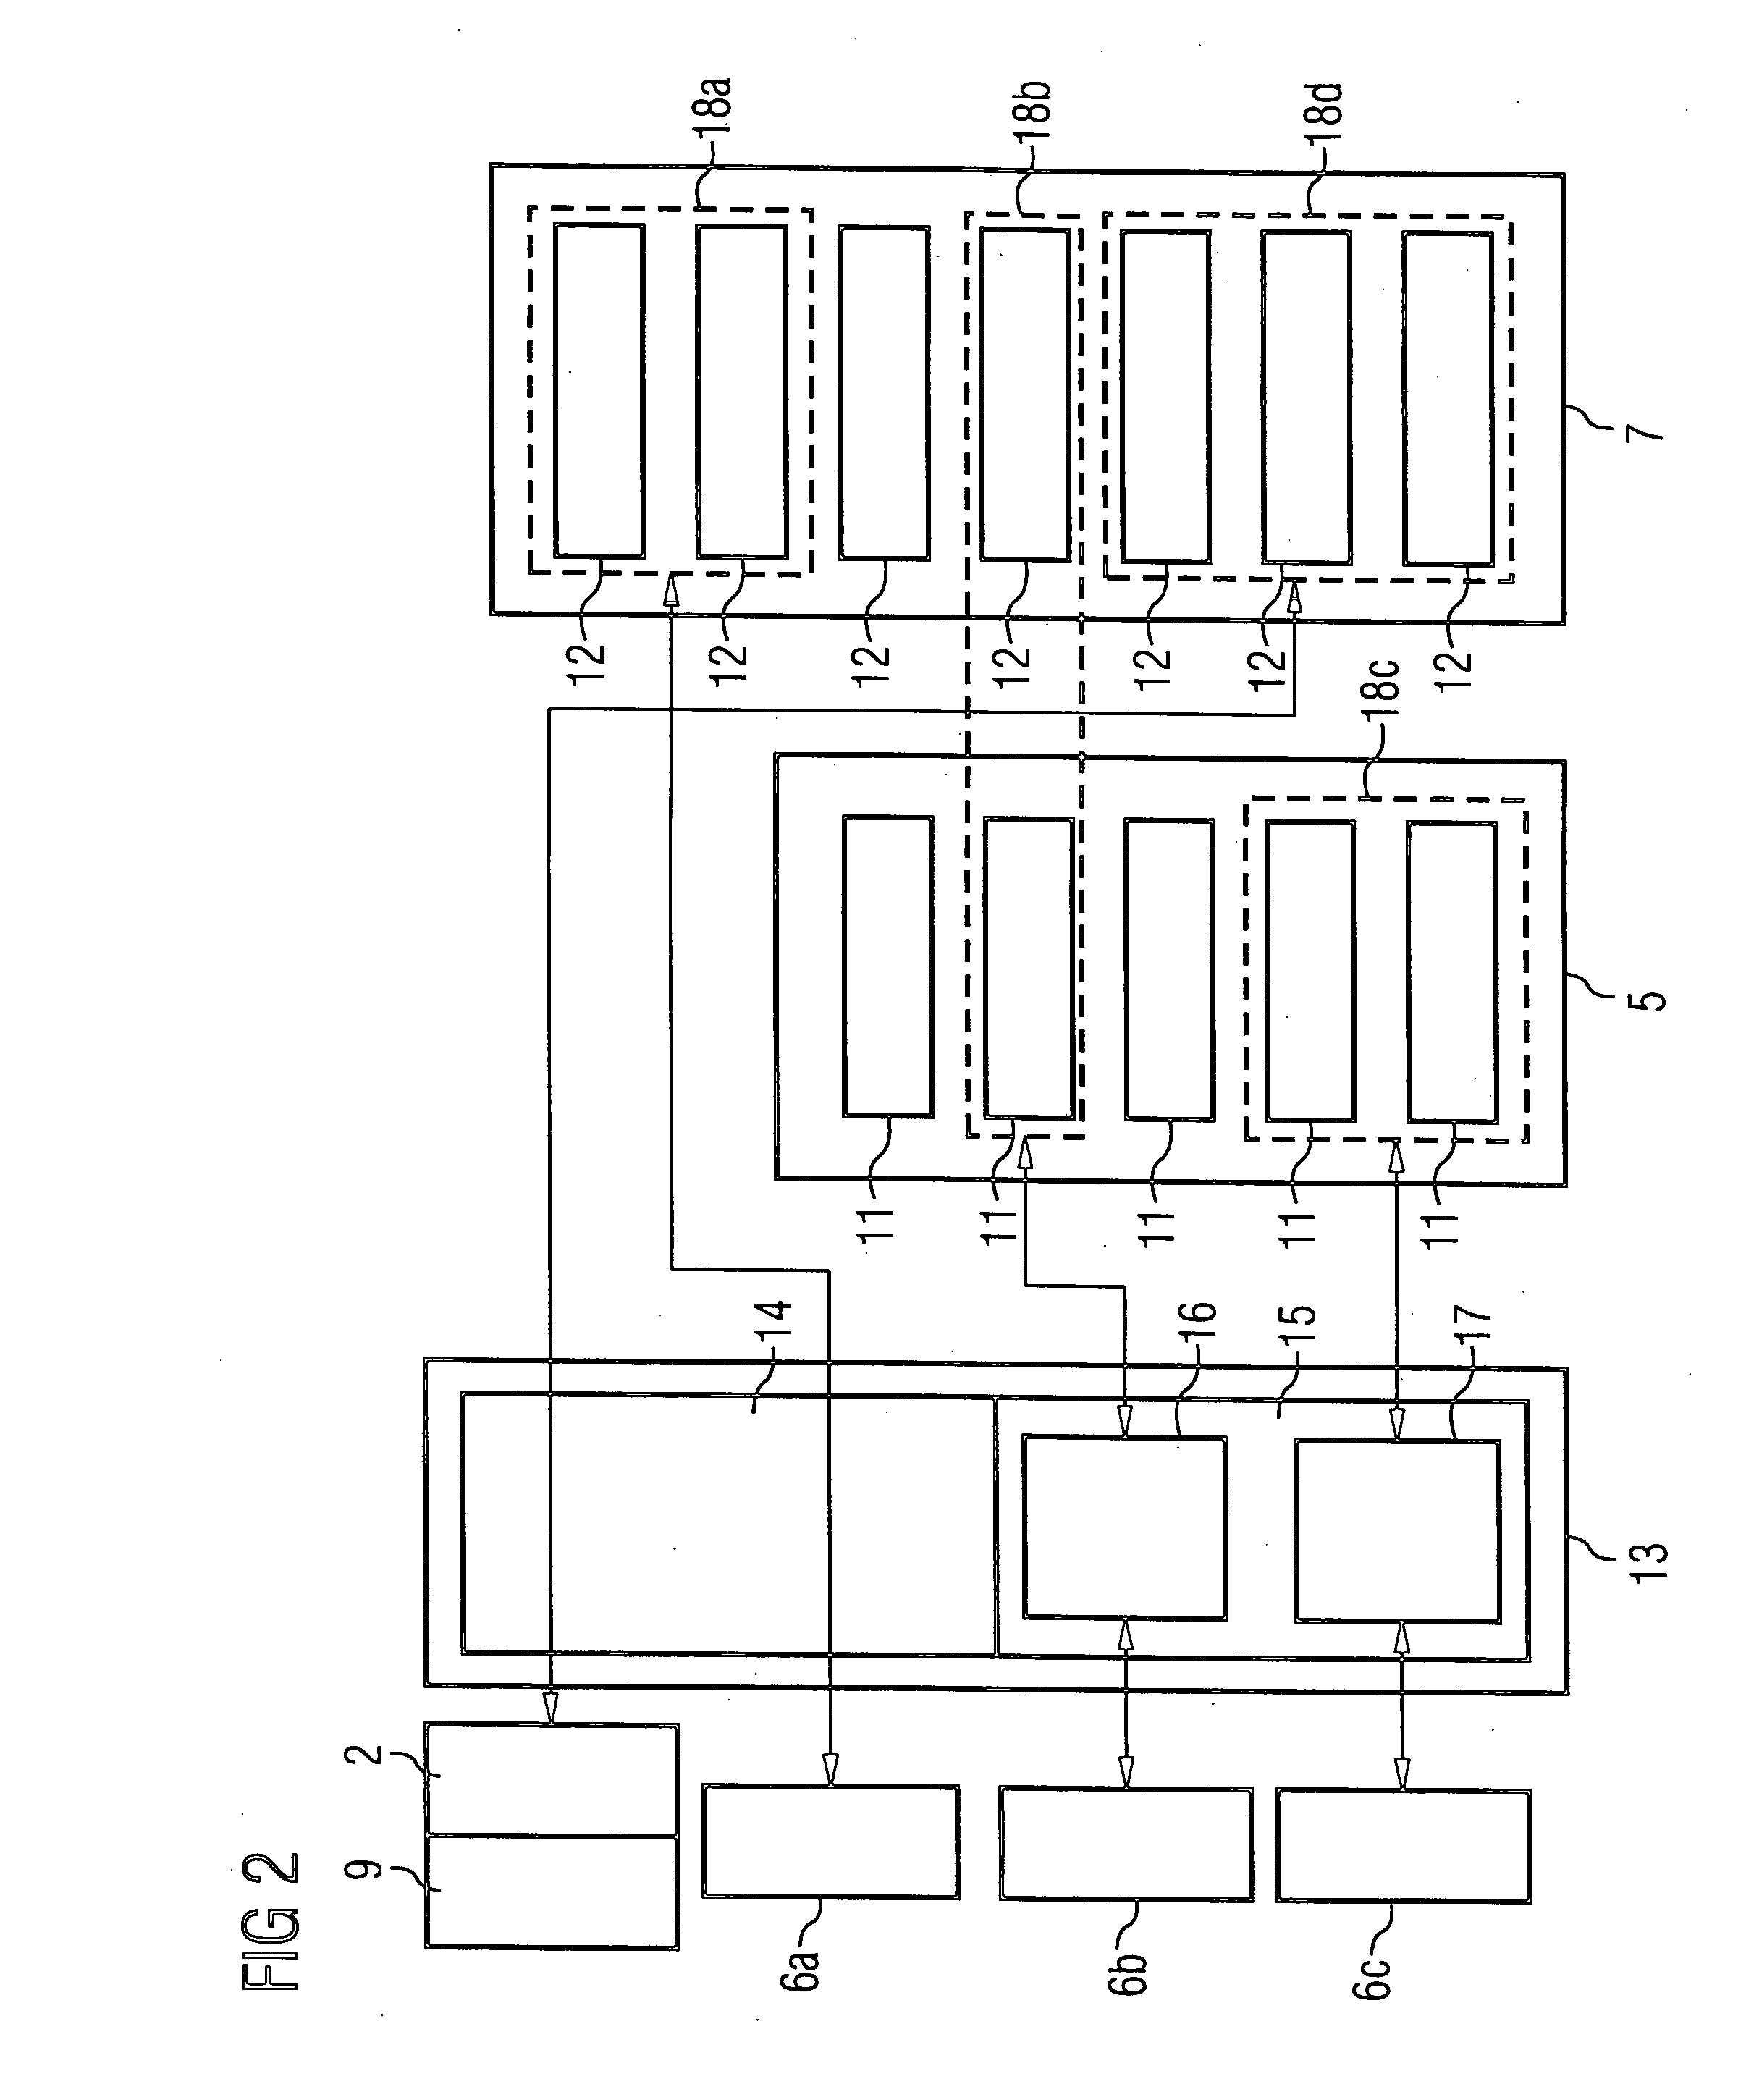 Method and system for allocating, accessing and de-allocating storage space of a memory card